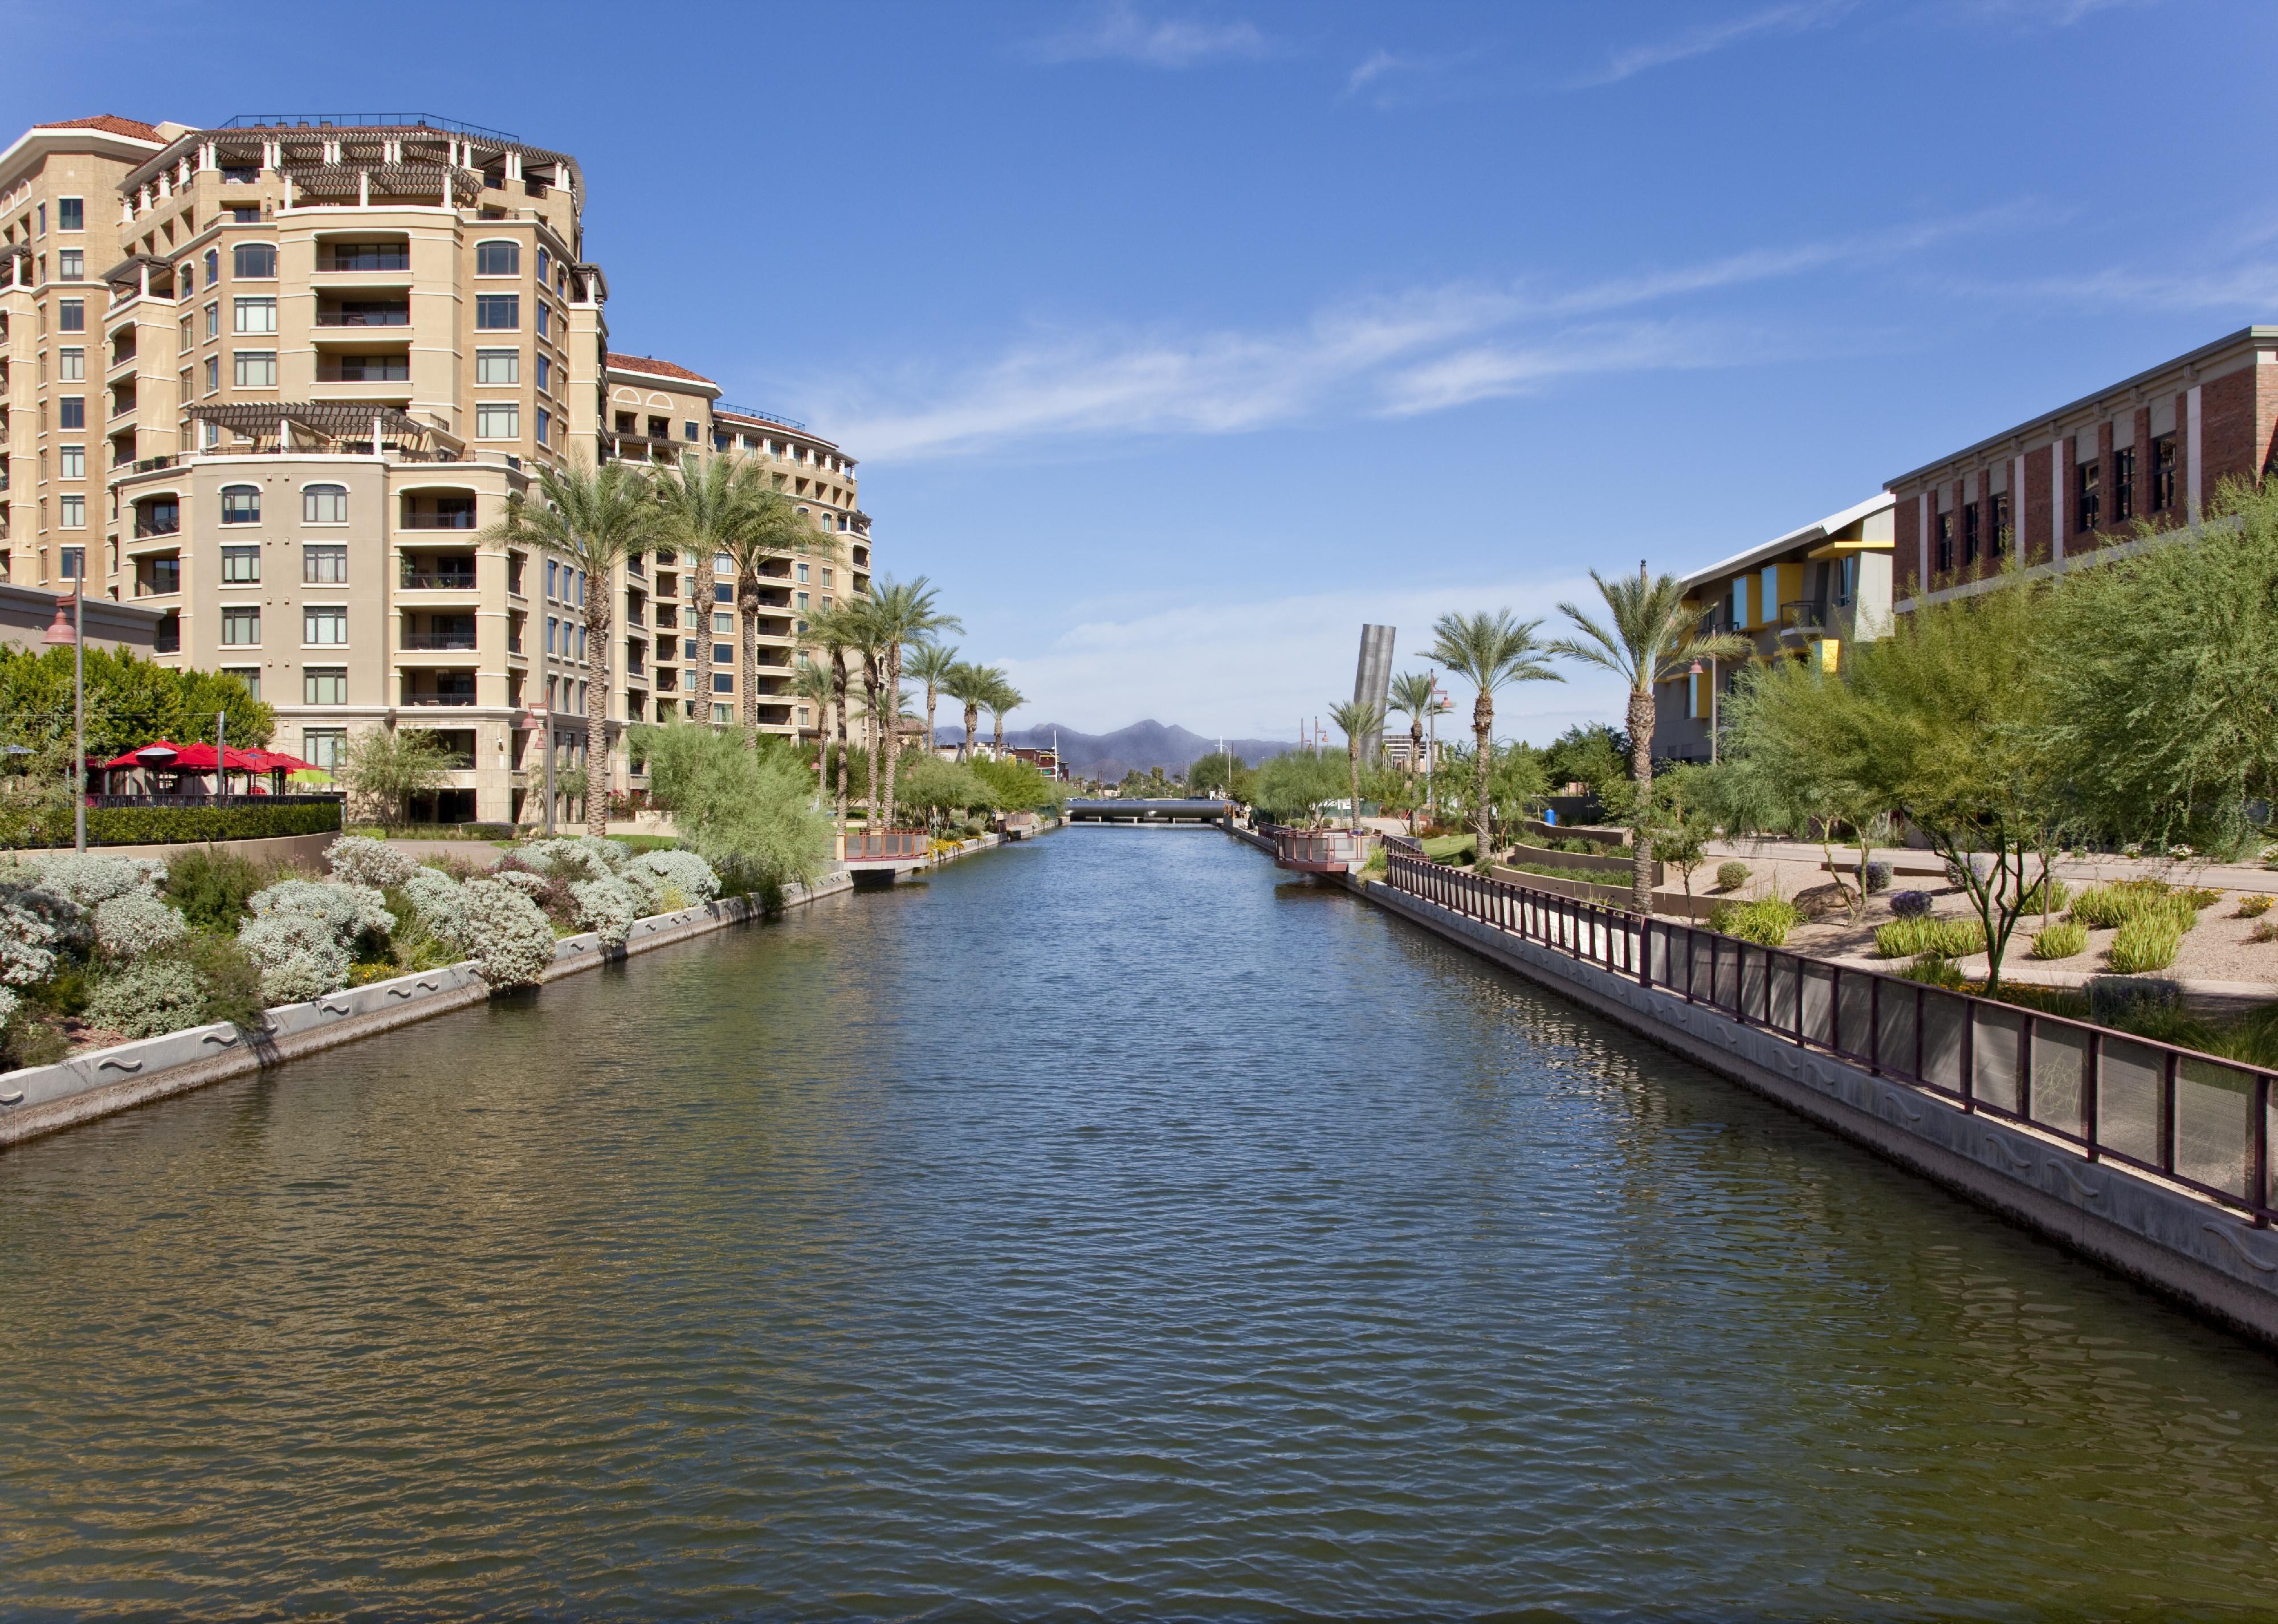 The Arizona Canal in downtown Scottsdale.